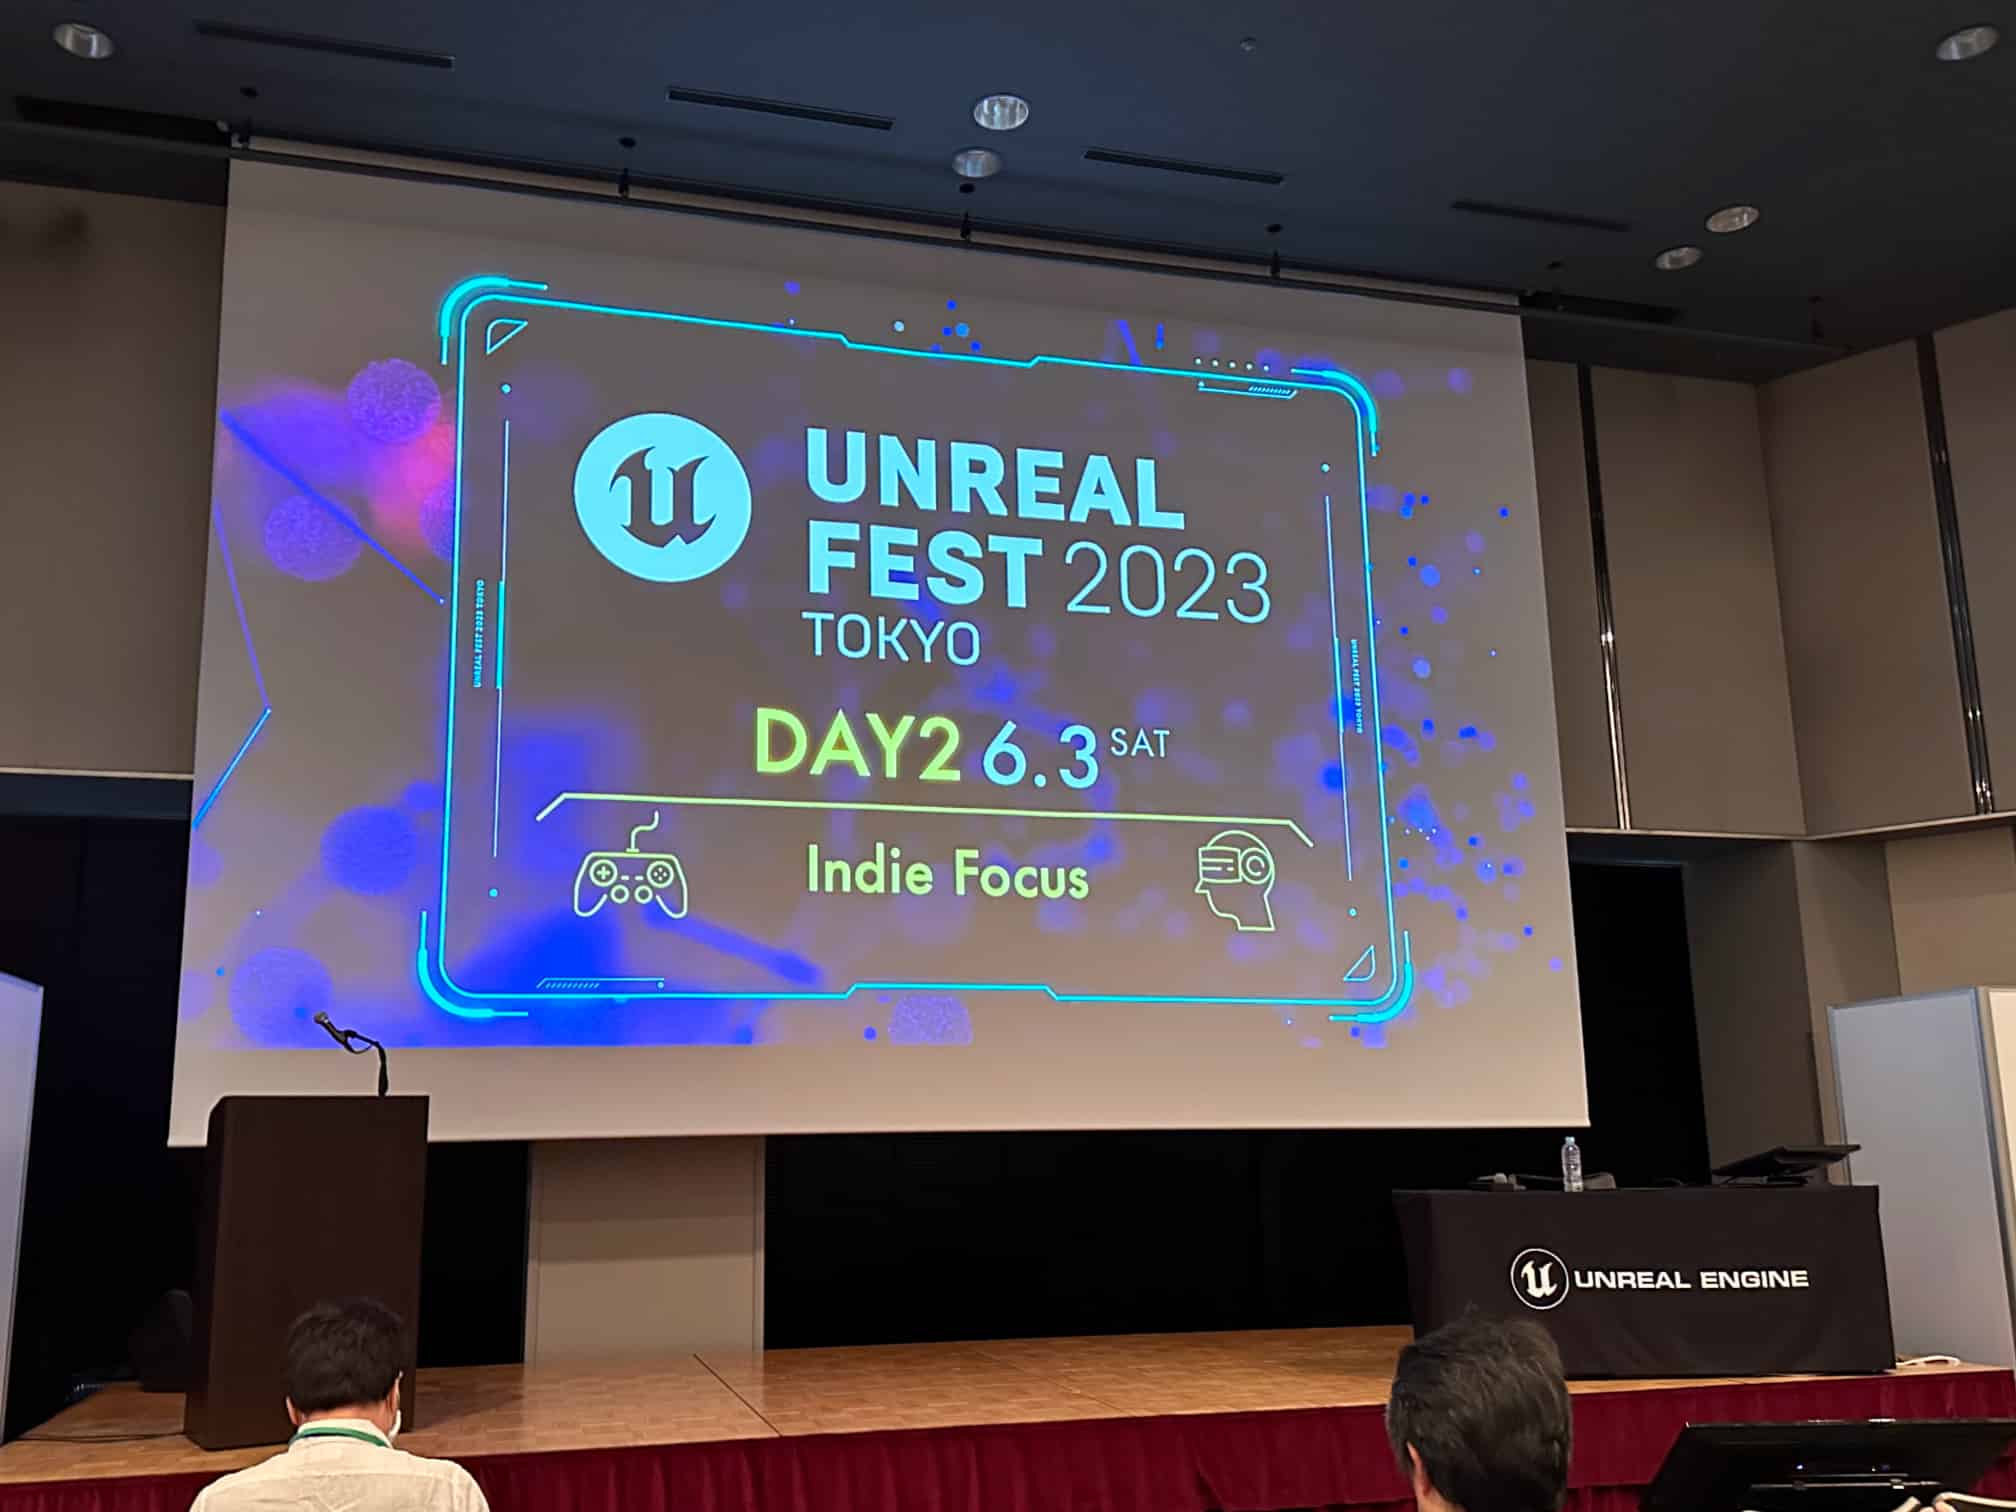 Unreal Fest 2023 Tokyo conference stage on Day 2, focused on indie game development